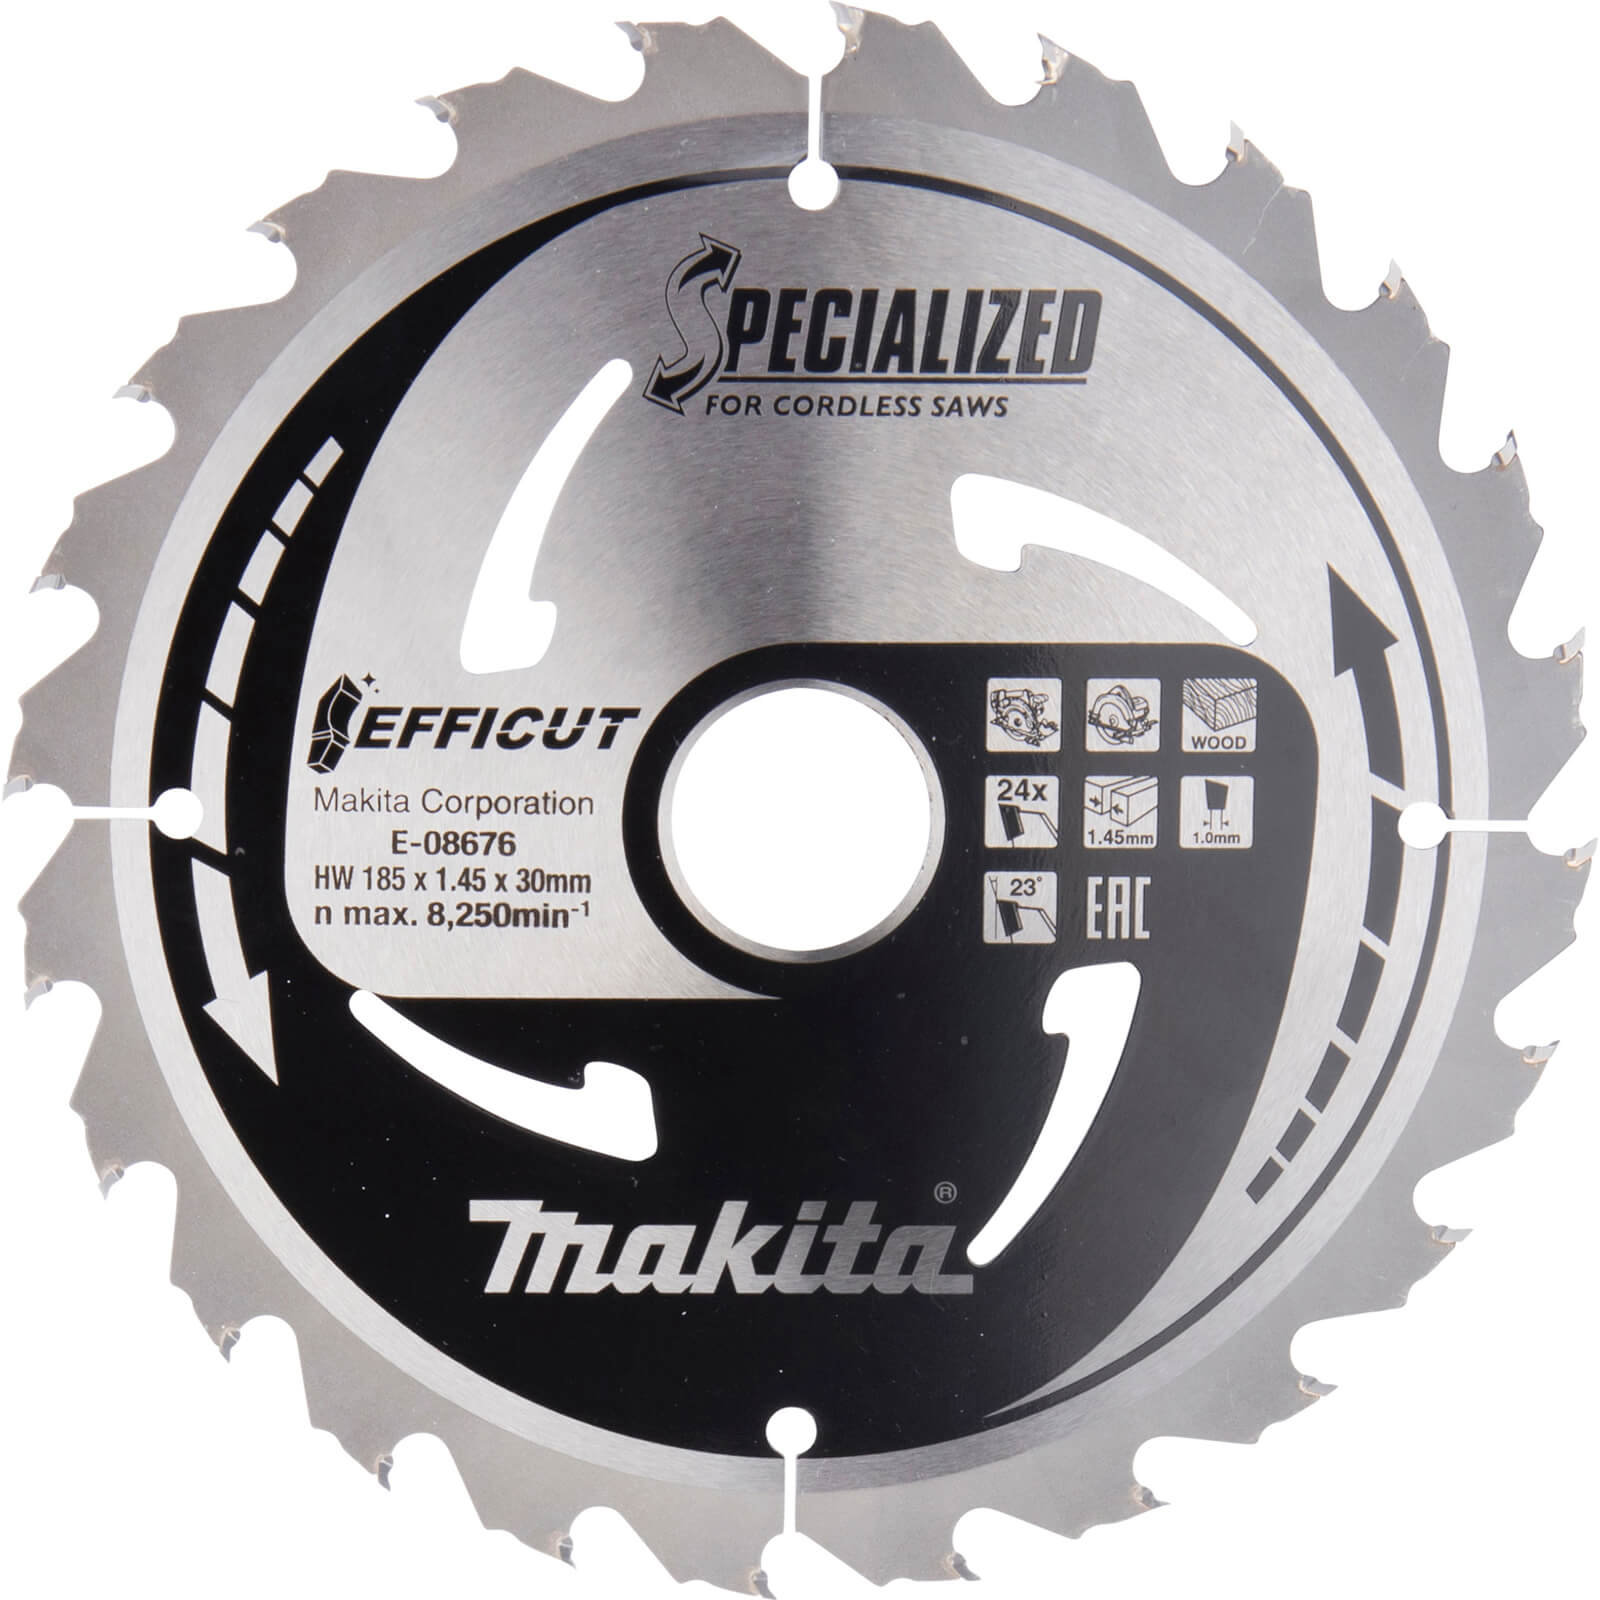 Image of Makita SPECIALIZED Efficut Wood Cutting Saw Blade 185mm 24T 30mm